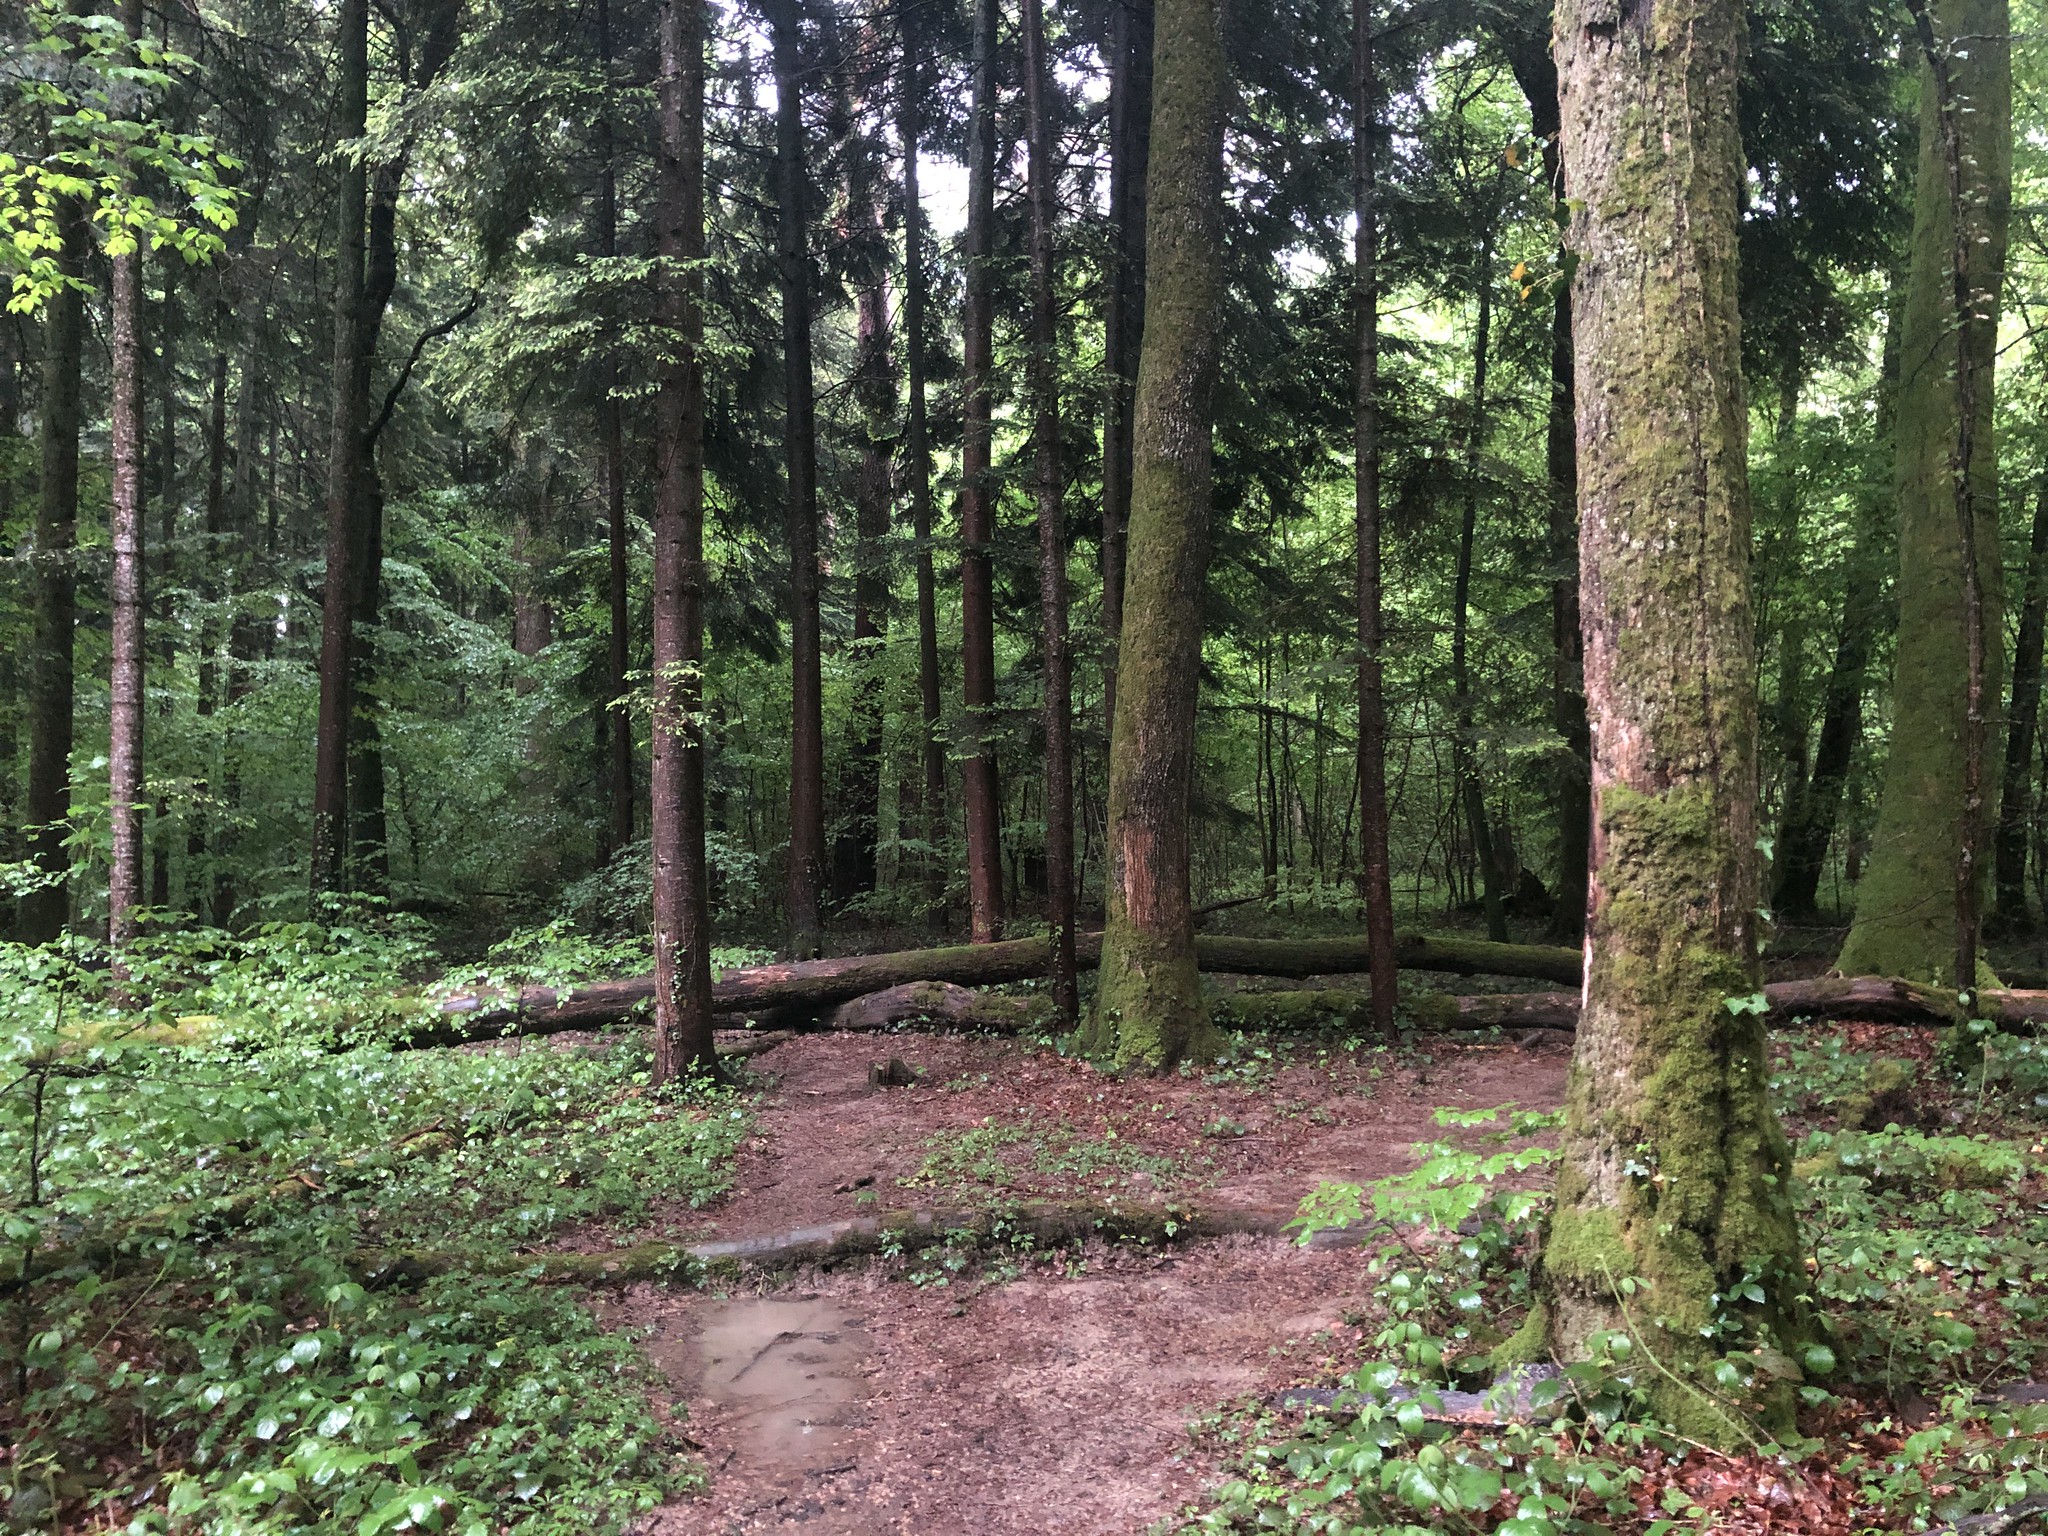 Day 47 Of Self-Isolation in Switzerland – A Walk In The Rain